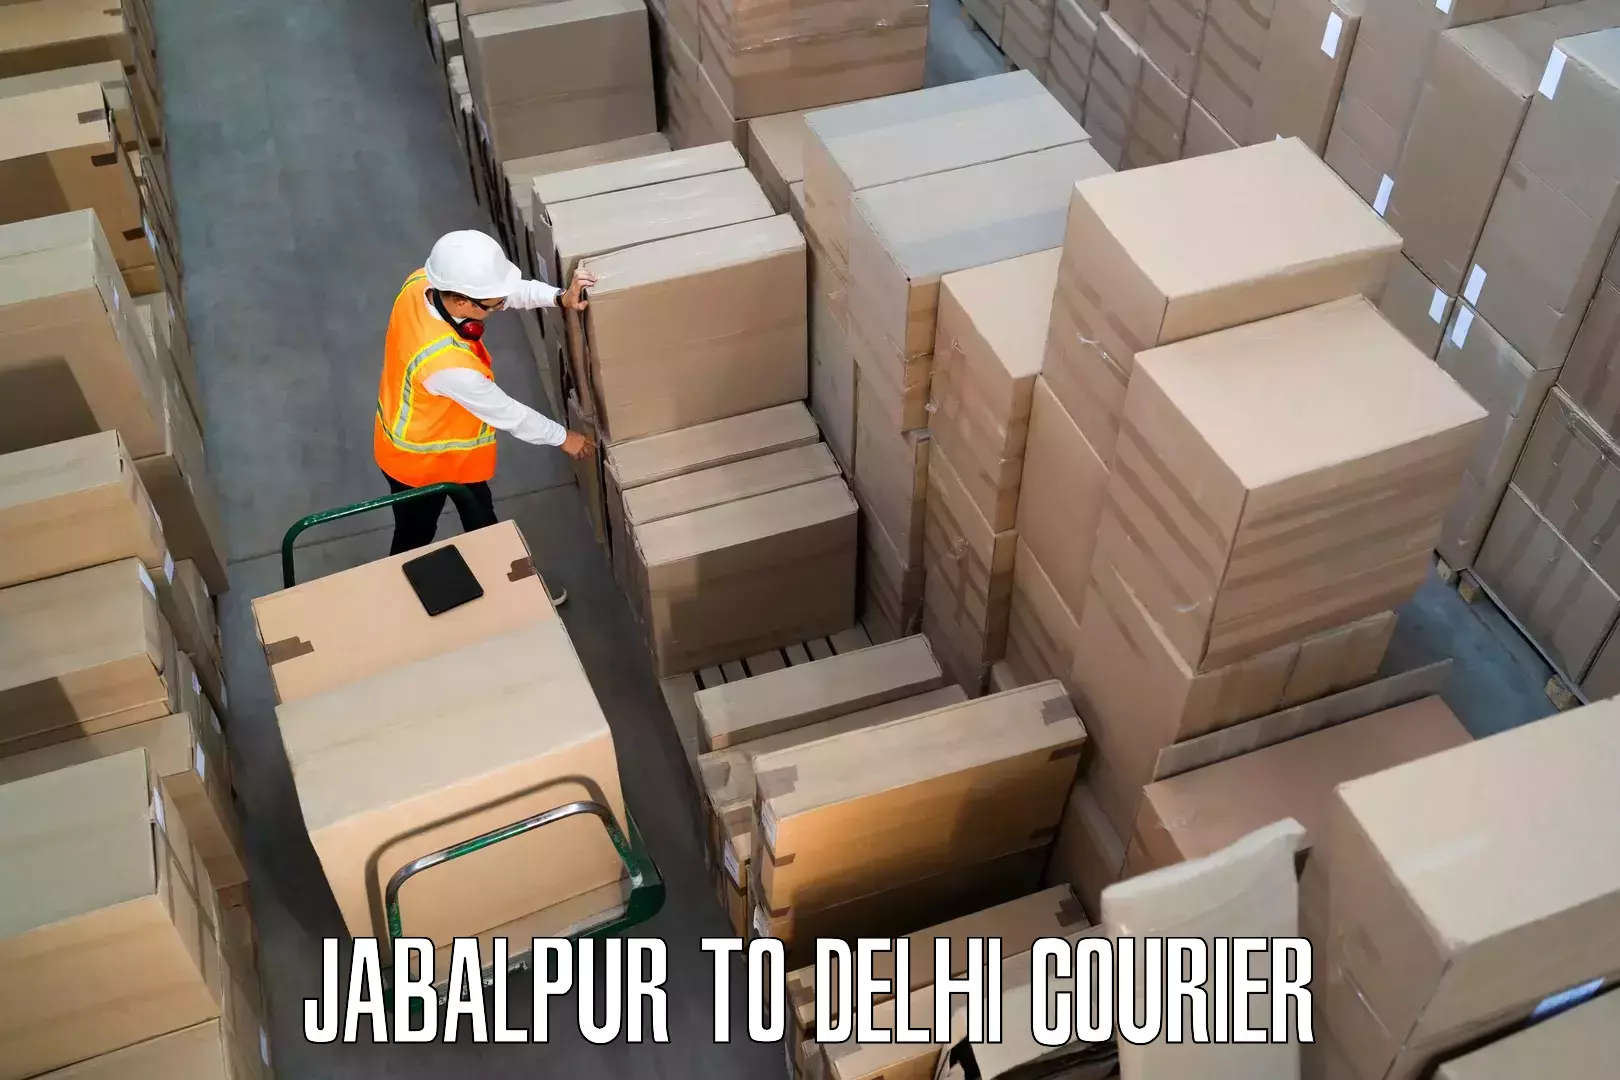 Quality relocation assistance Jabalpur to NCR